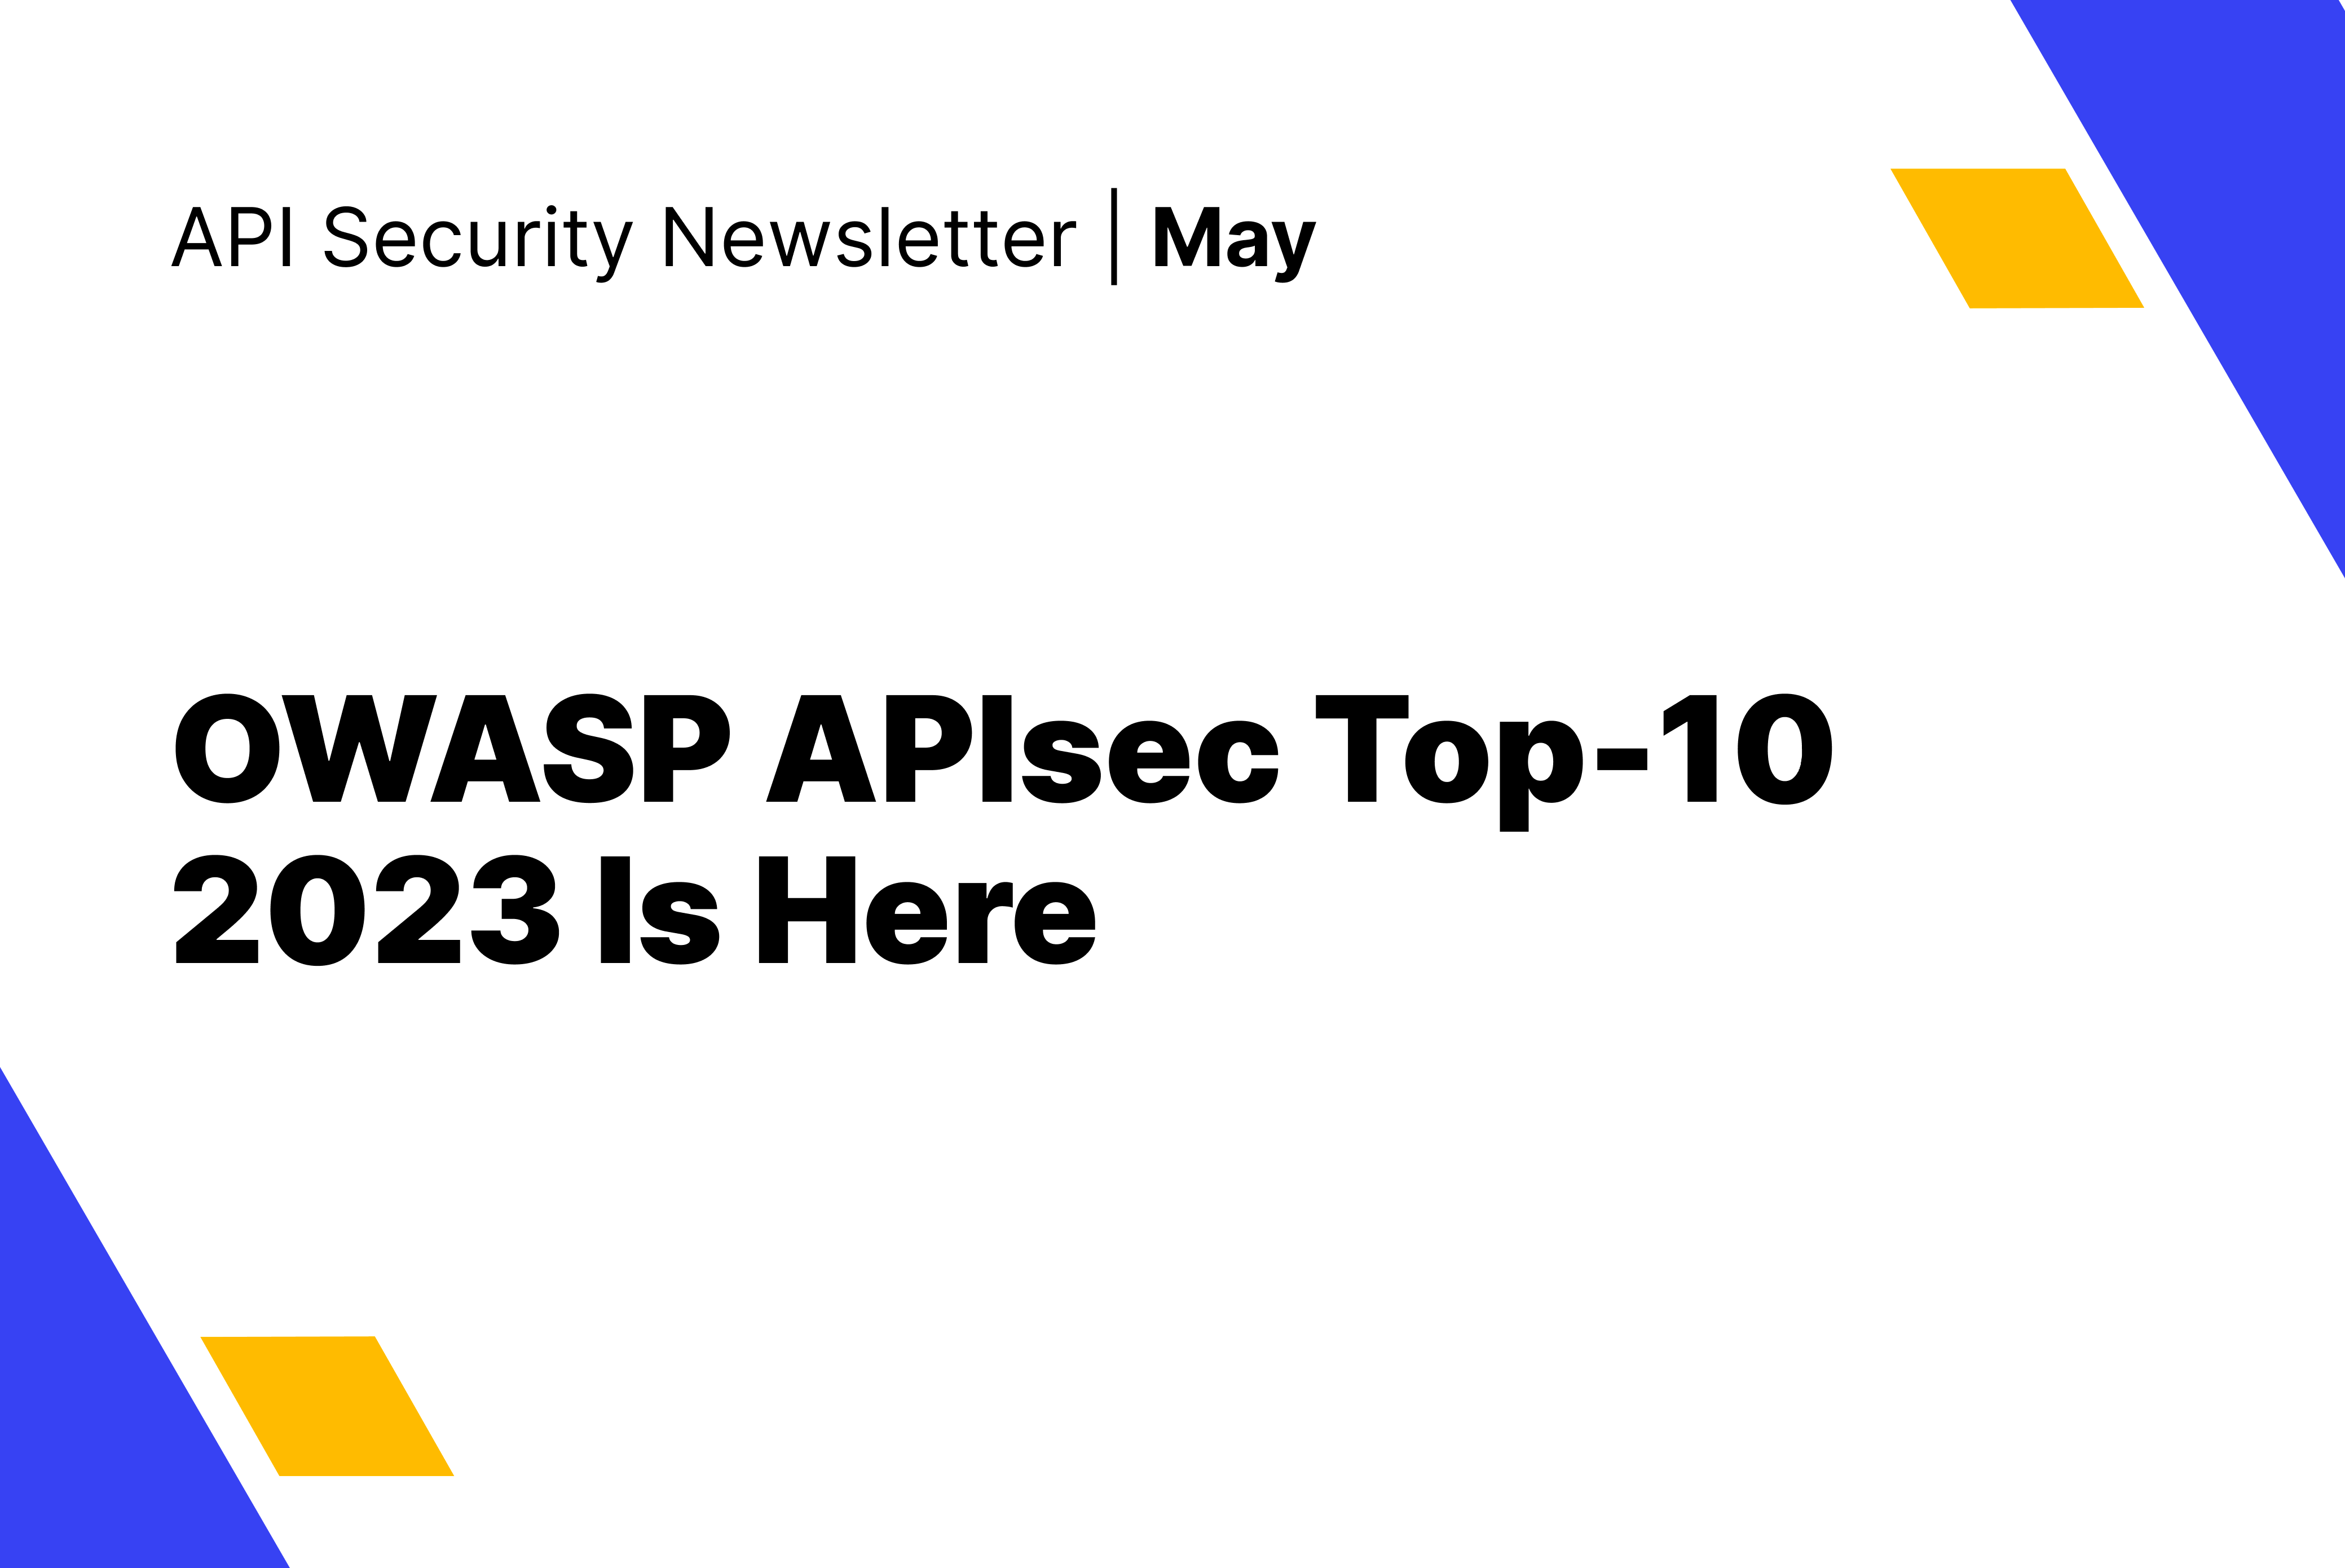 Owasp apesec top 10 with a focus on Cloud Integration and IT Support.